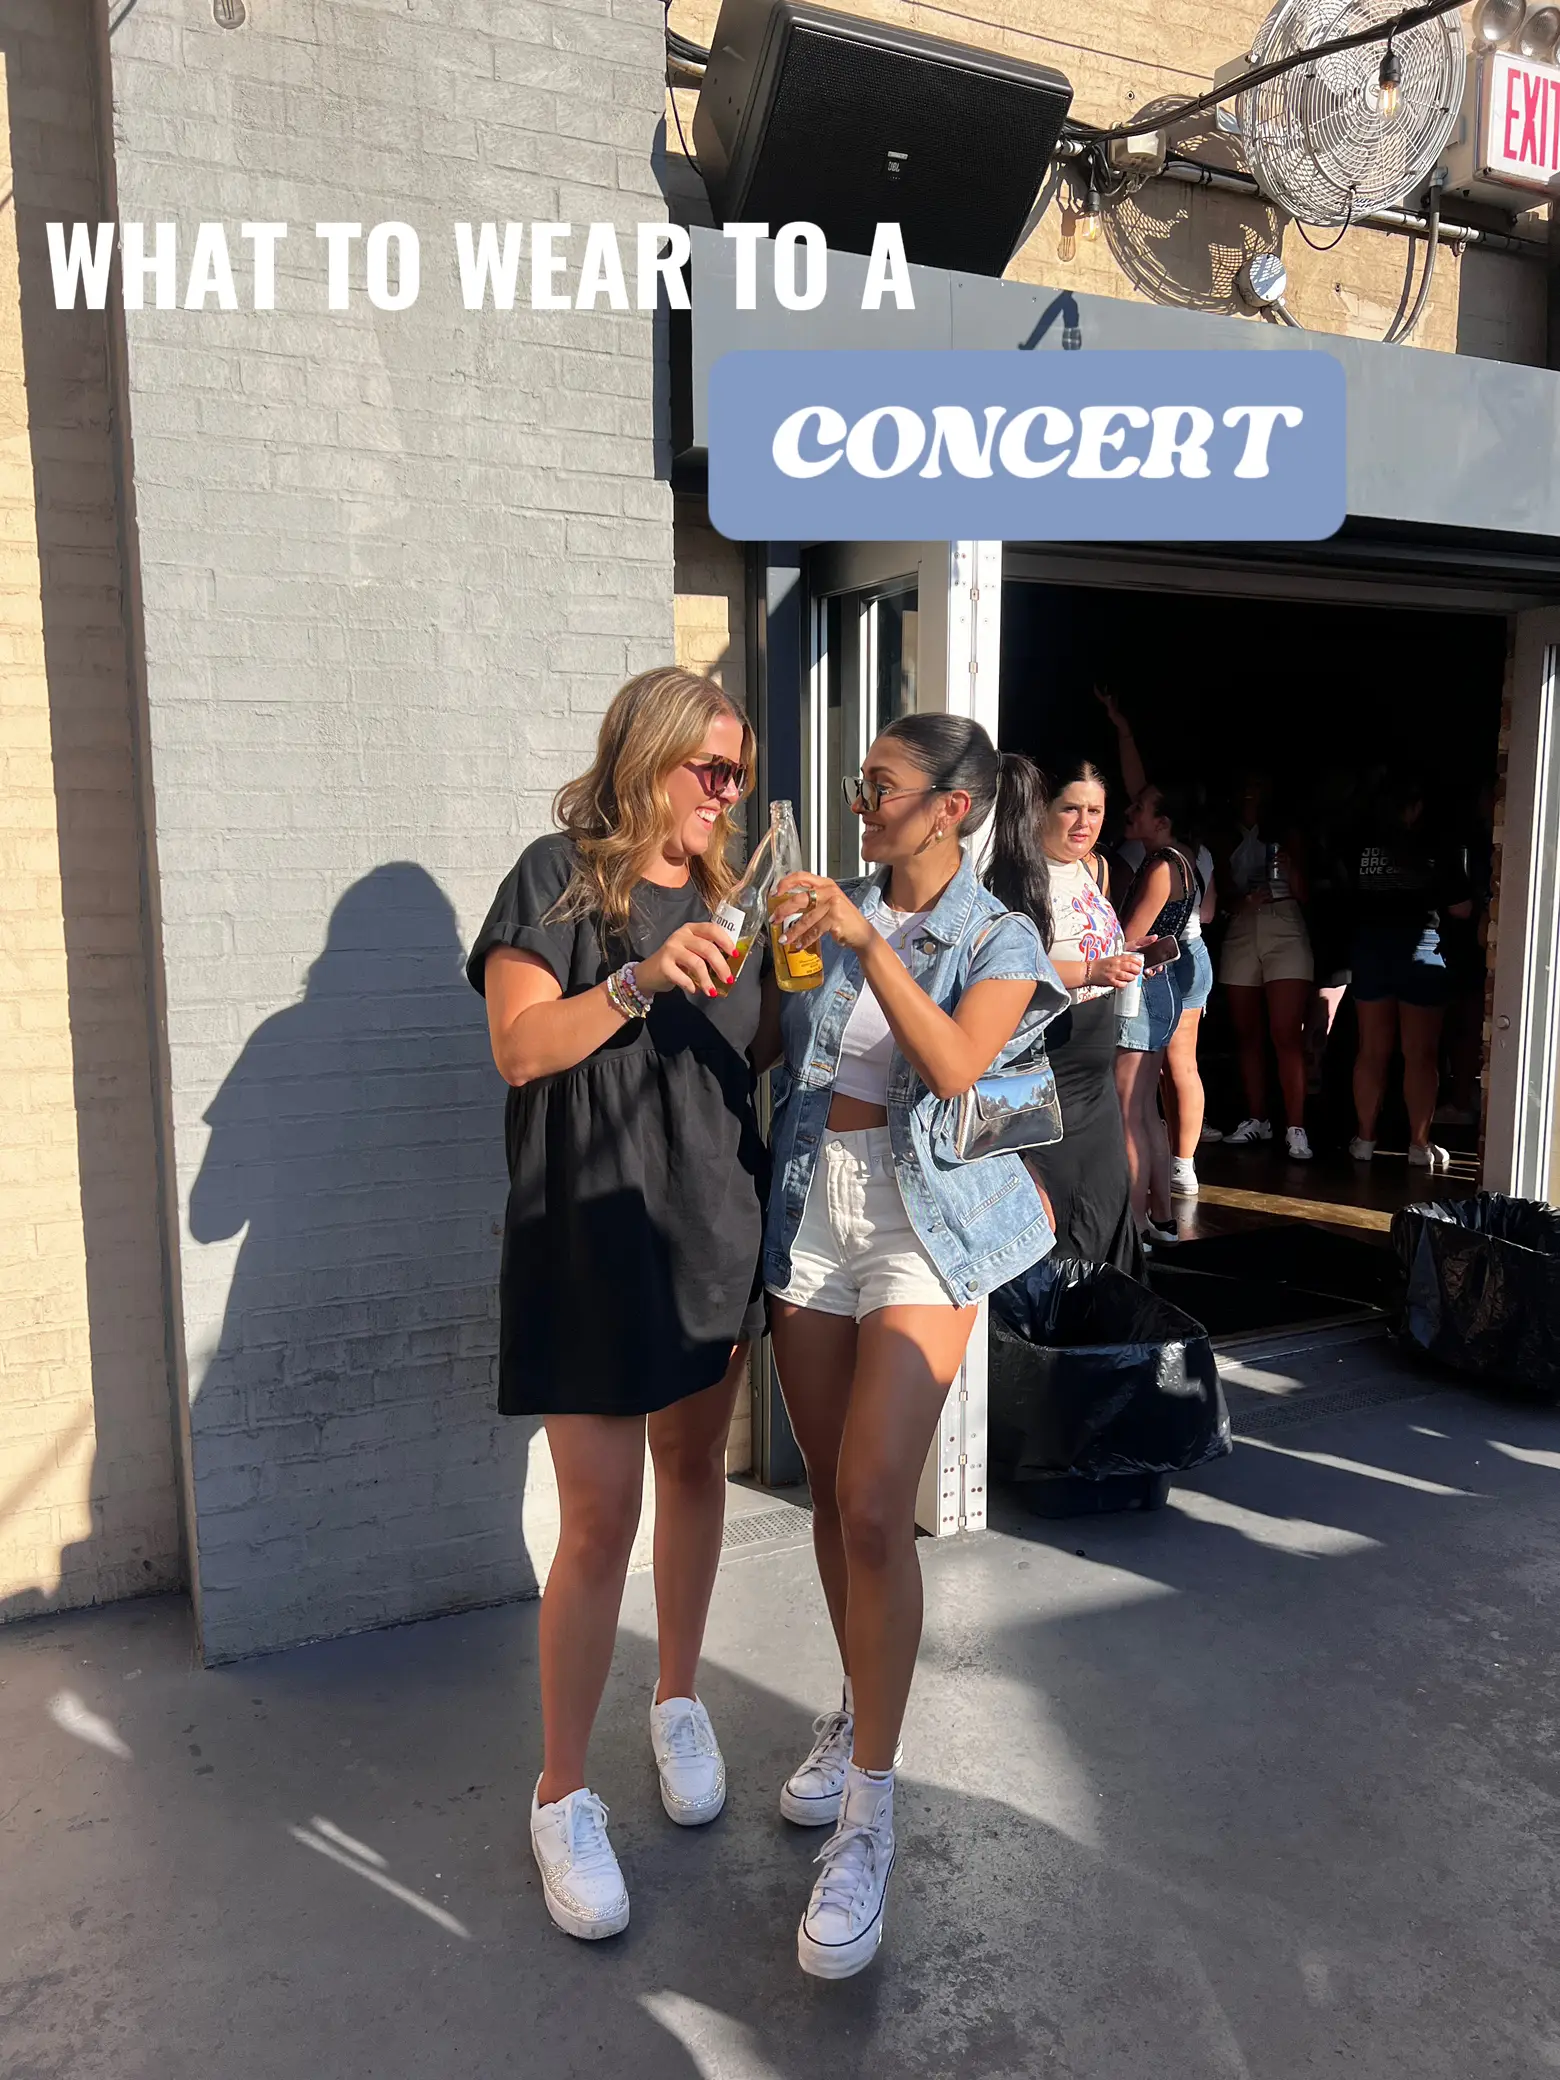 WHAT TO WEAR TO A CONCERT's images